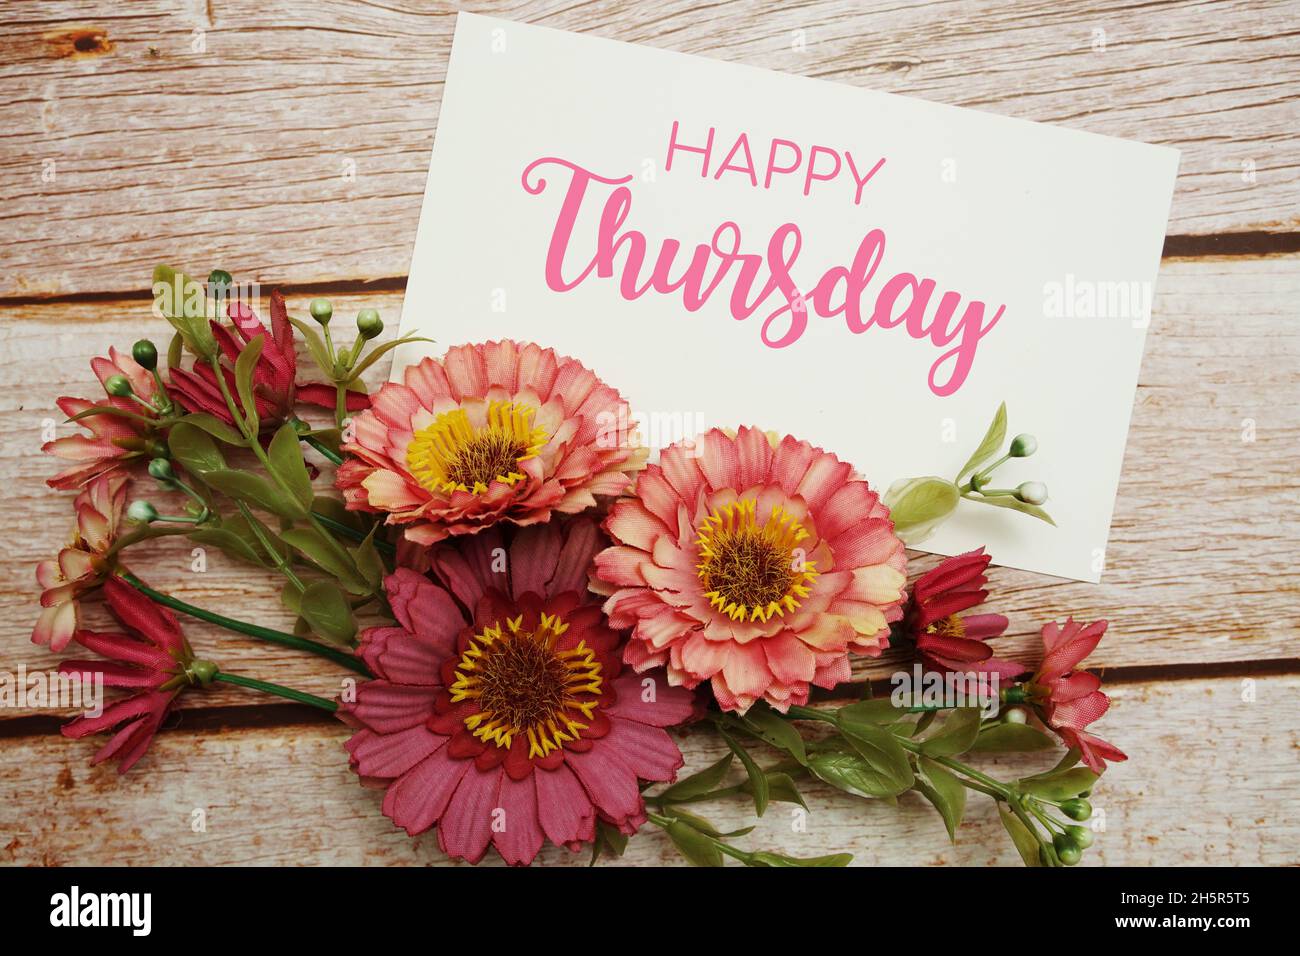 Happy Thursday card typography text with flower bouquet on wooden ...